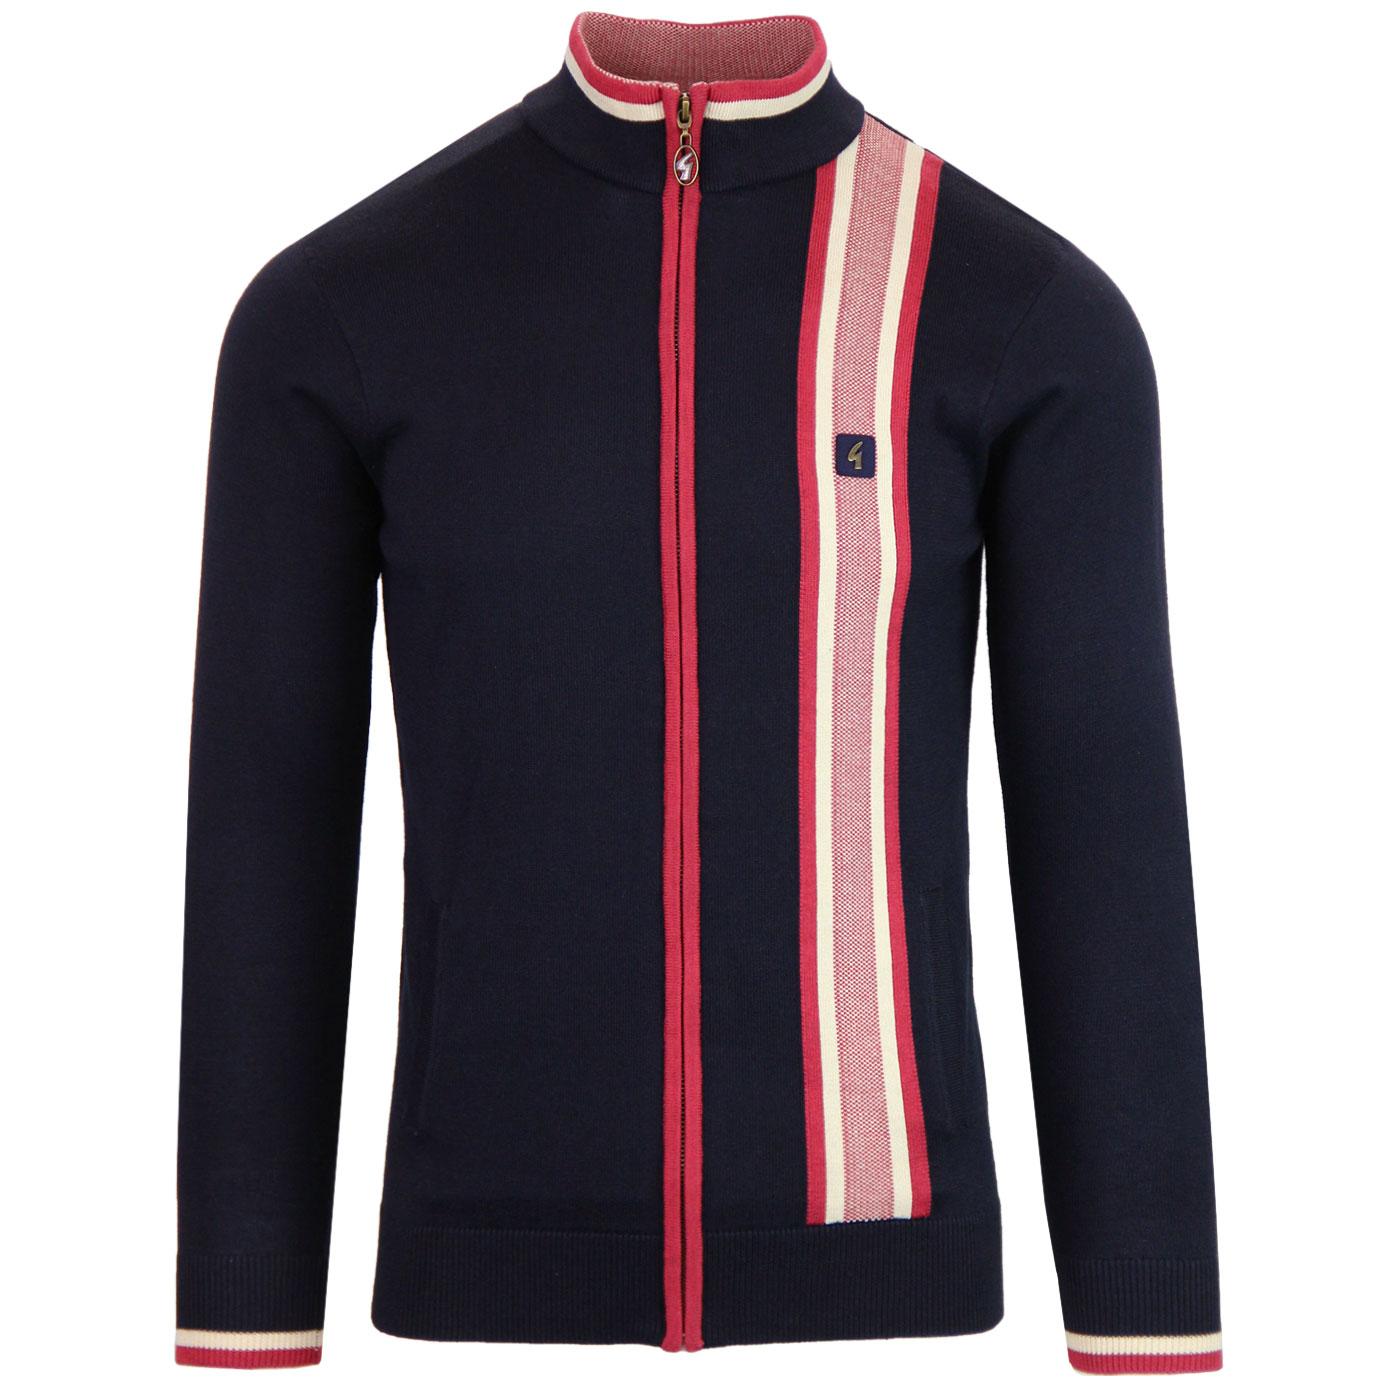 Malfort GABICCI VINTAGE Mod 70s Knitted Track Top